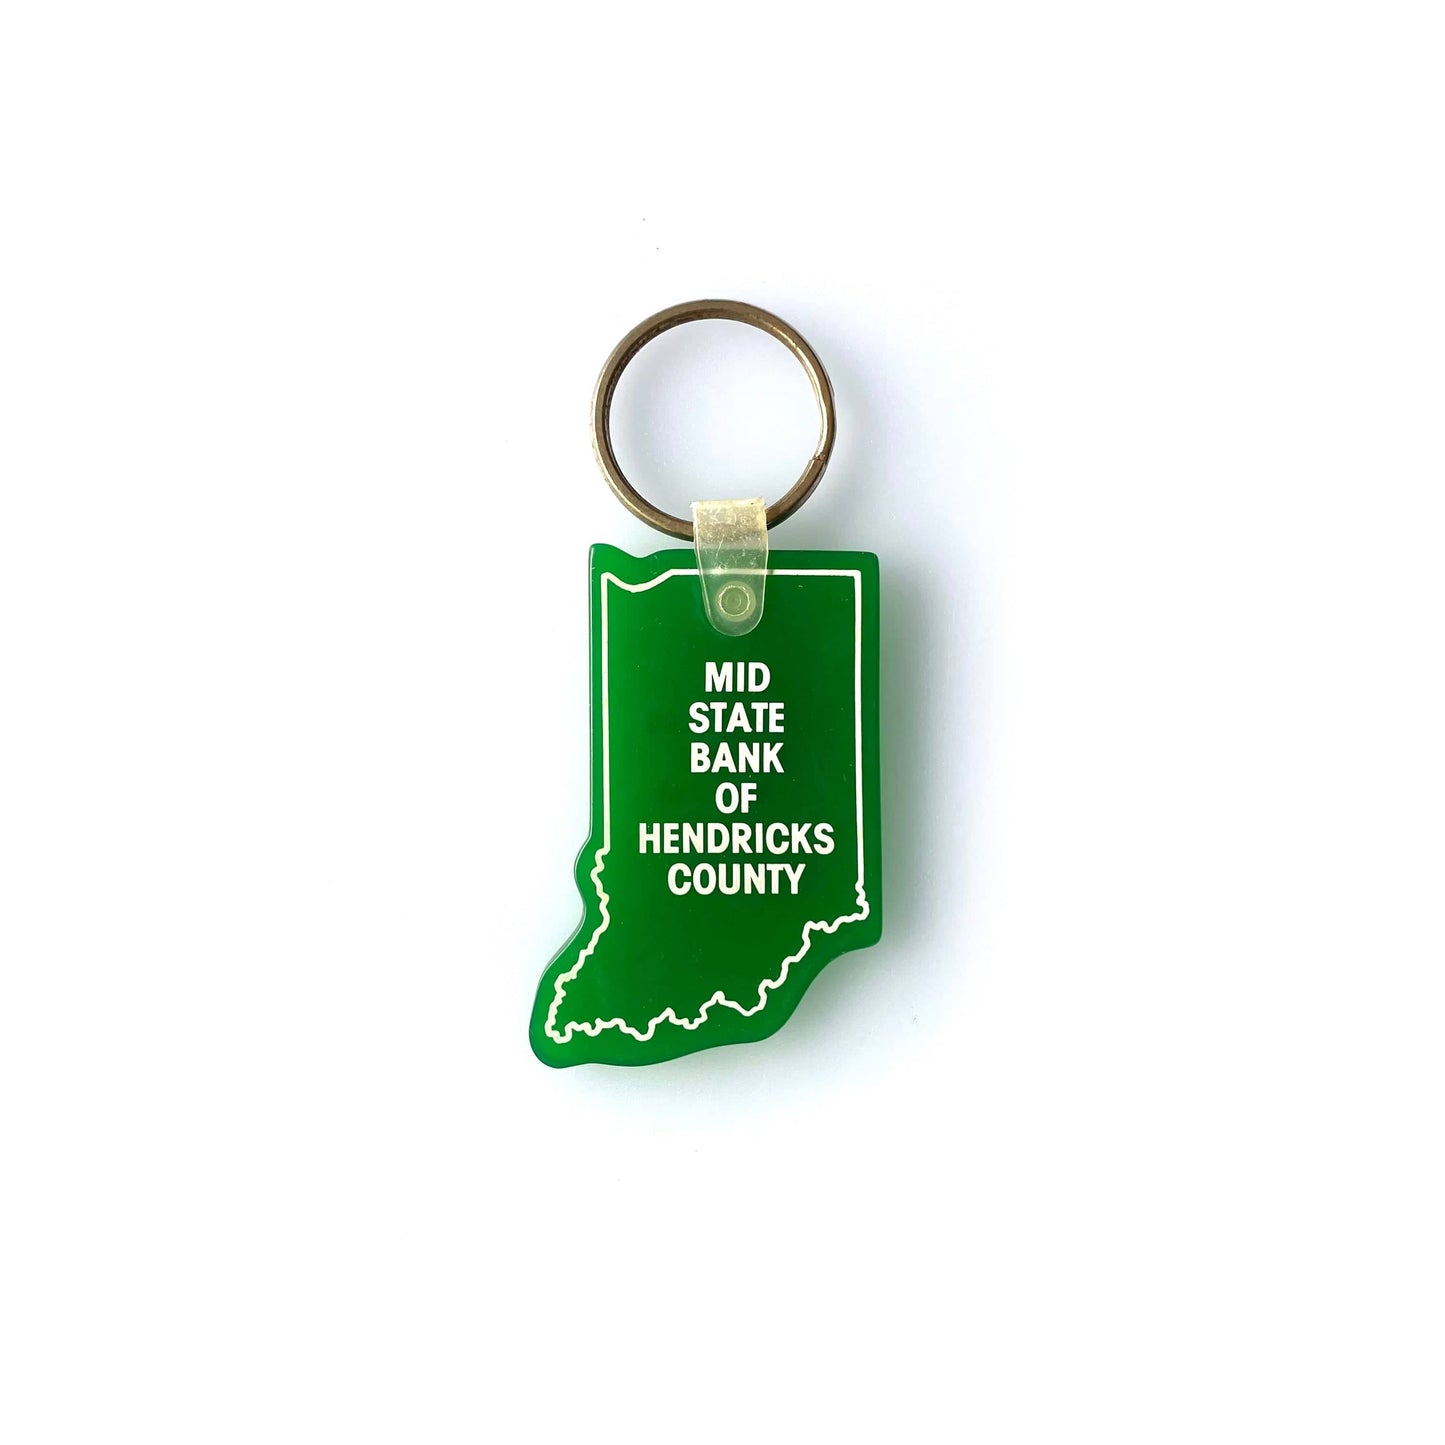 Vintage “MID STATE BANK OF HENDRICKS COUNTY “ Keychain Key Ring Rubber Green